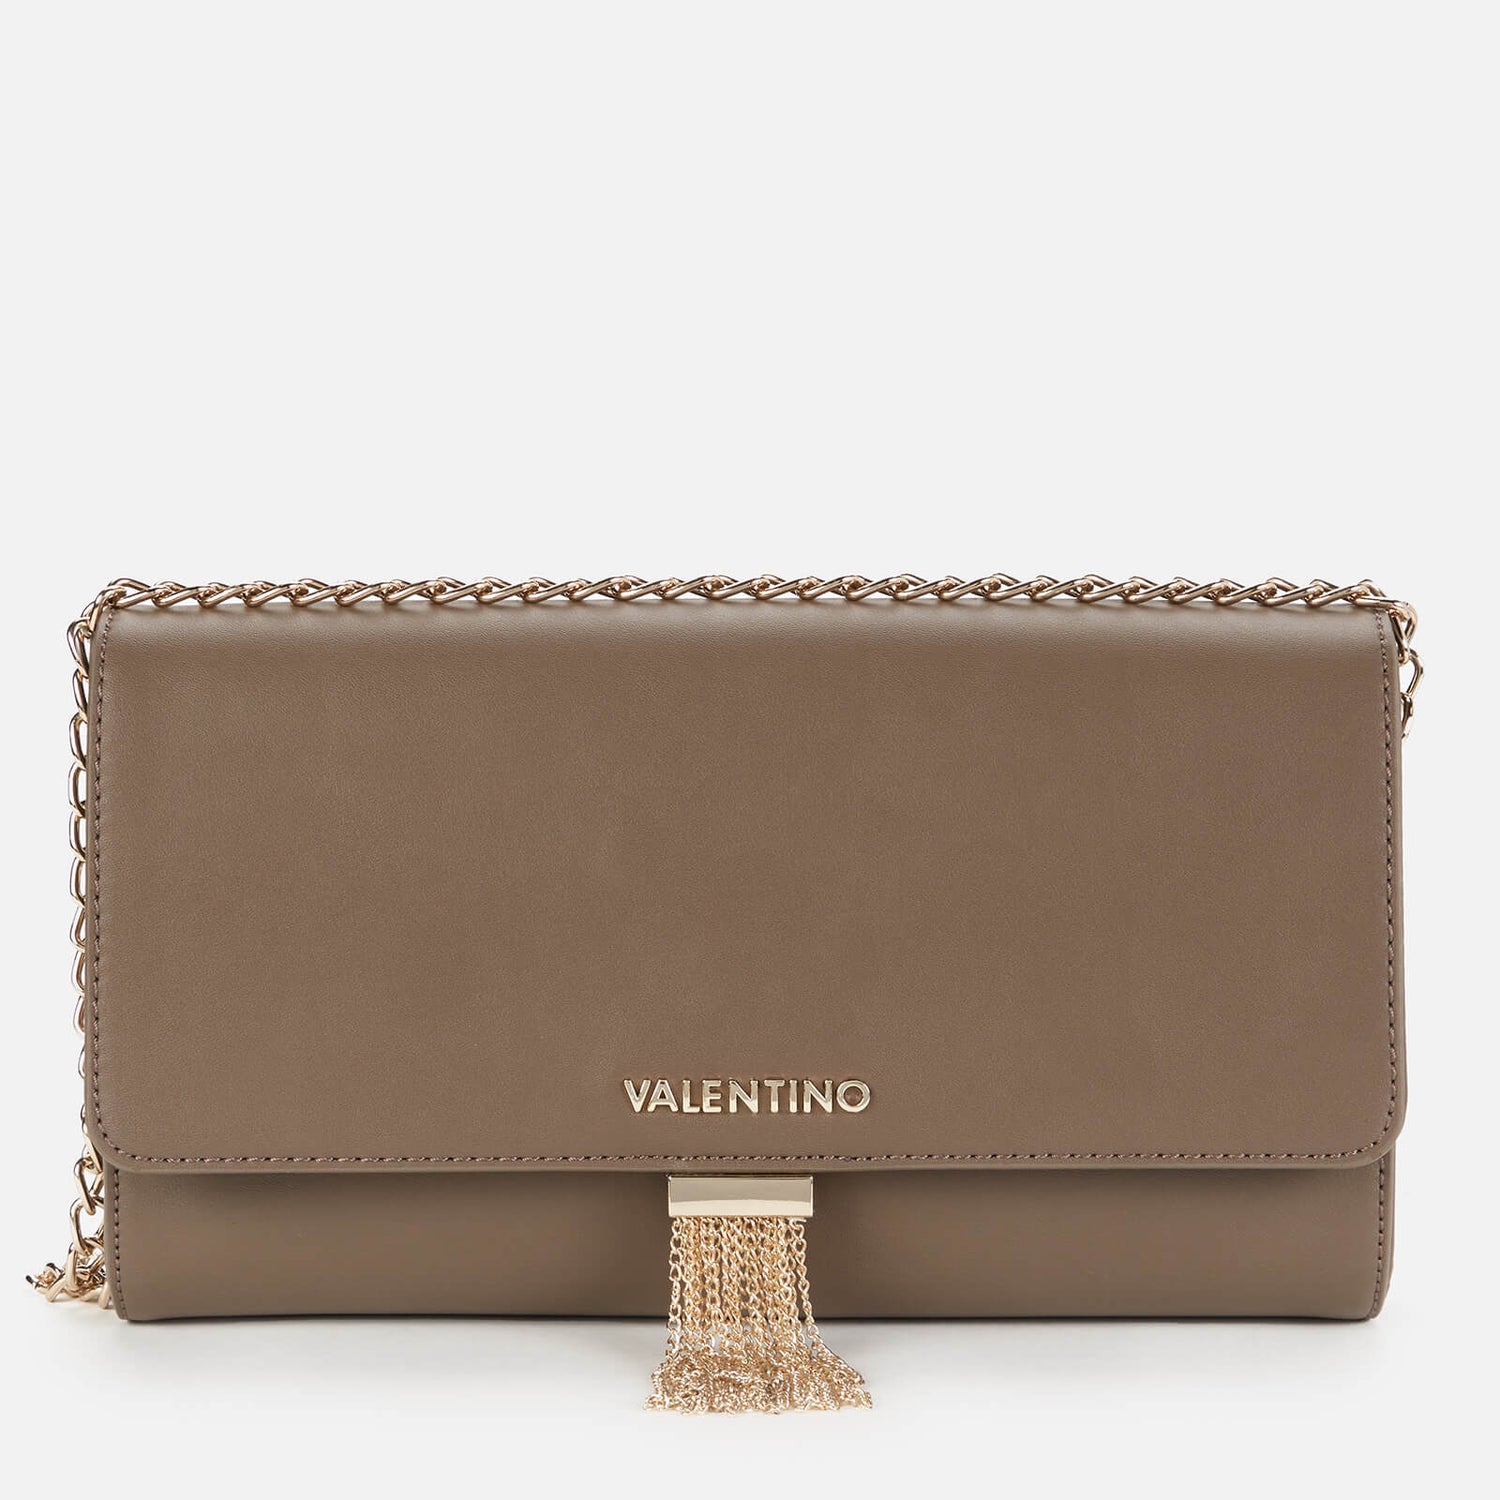 Valentino Bags Women's Piccadilly Large Shoulder Bag - Taupe